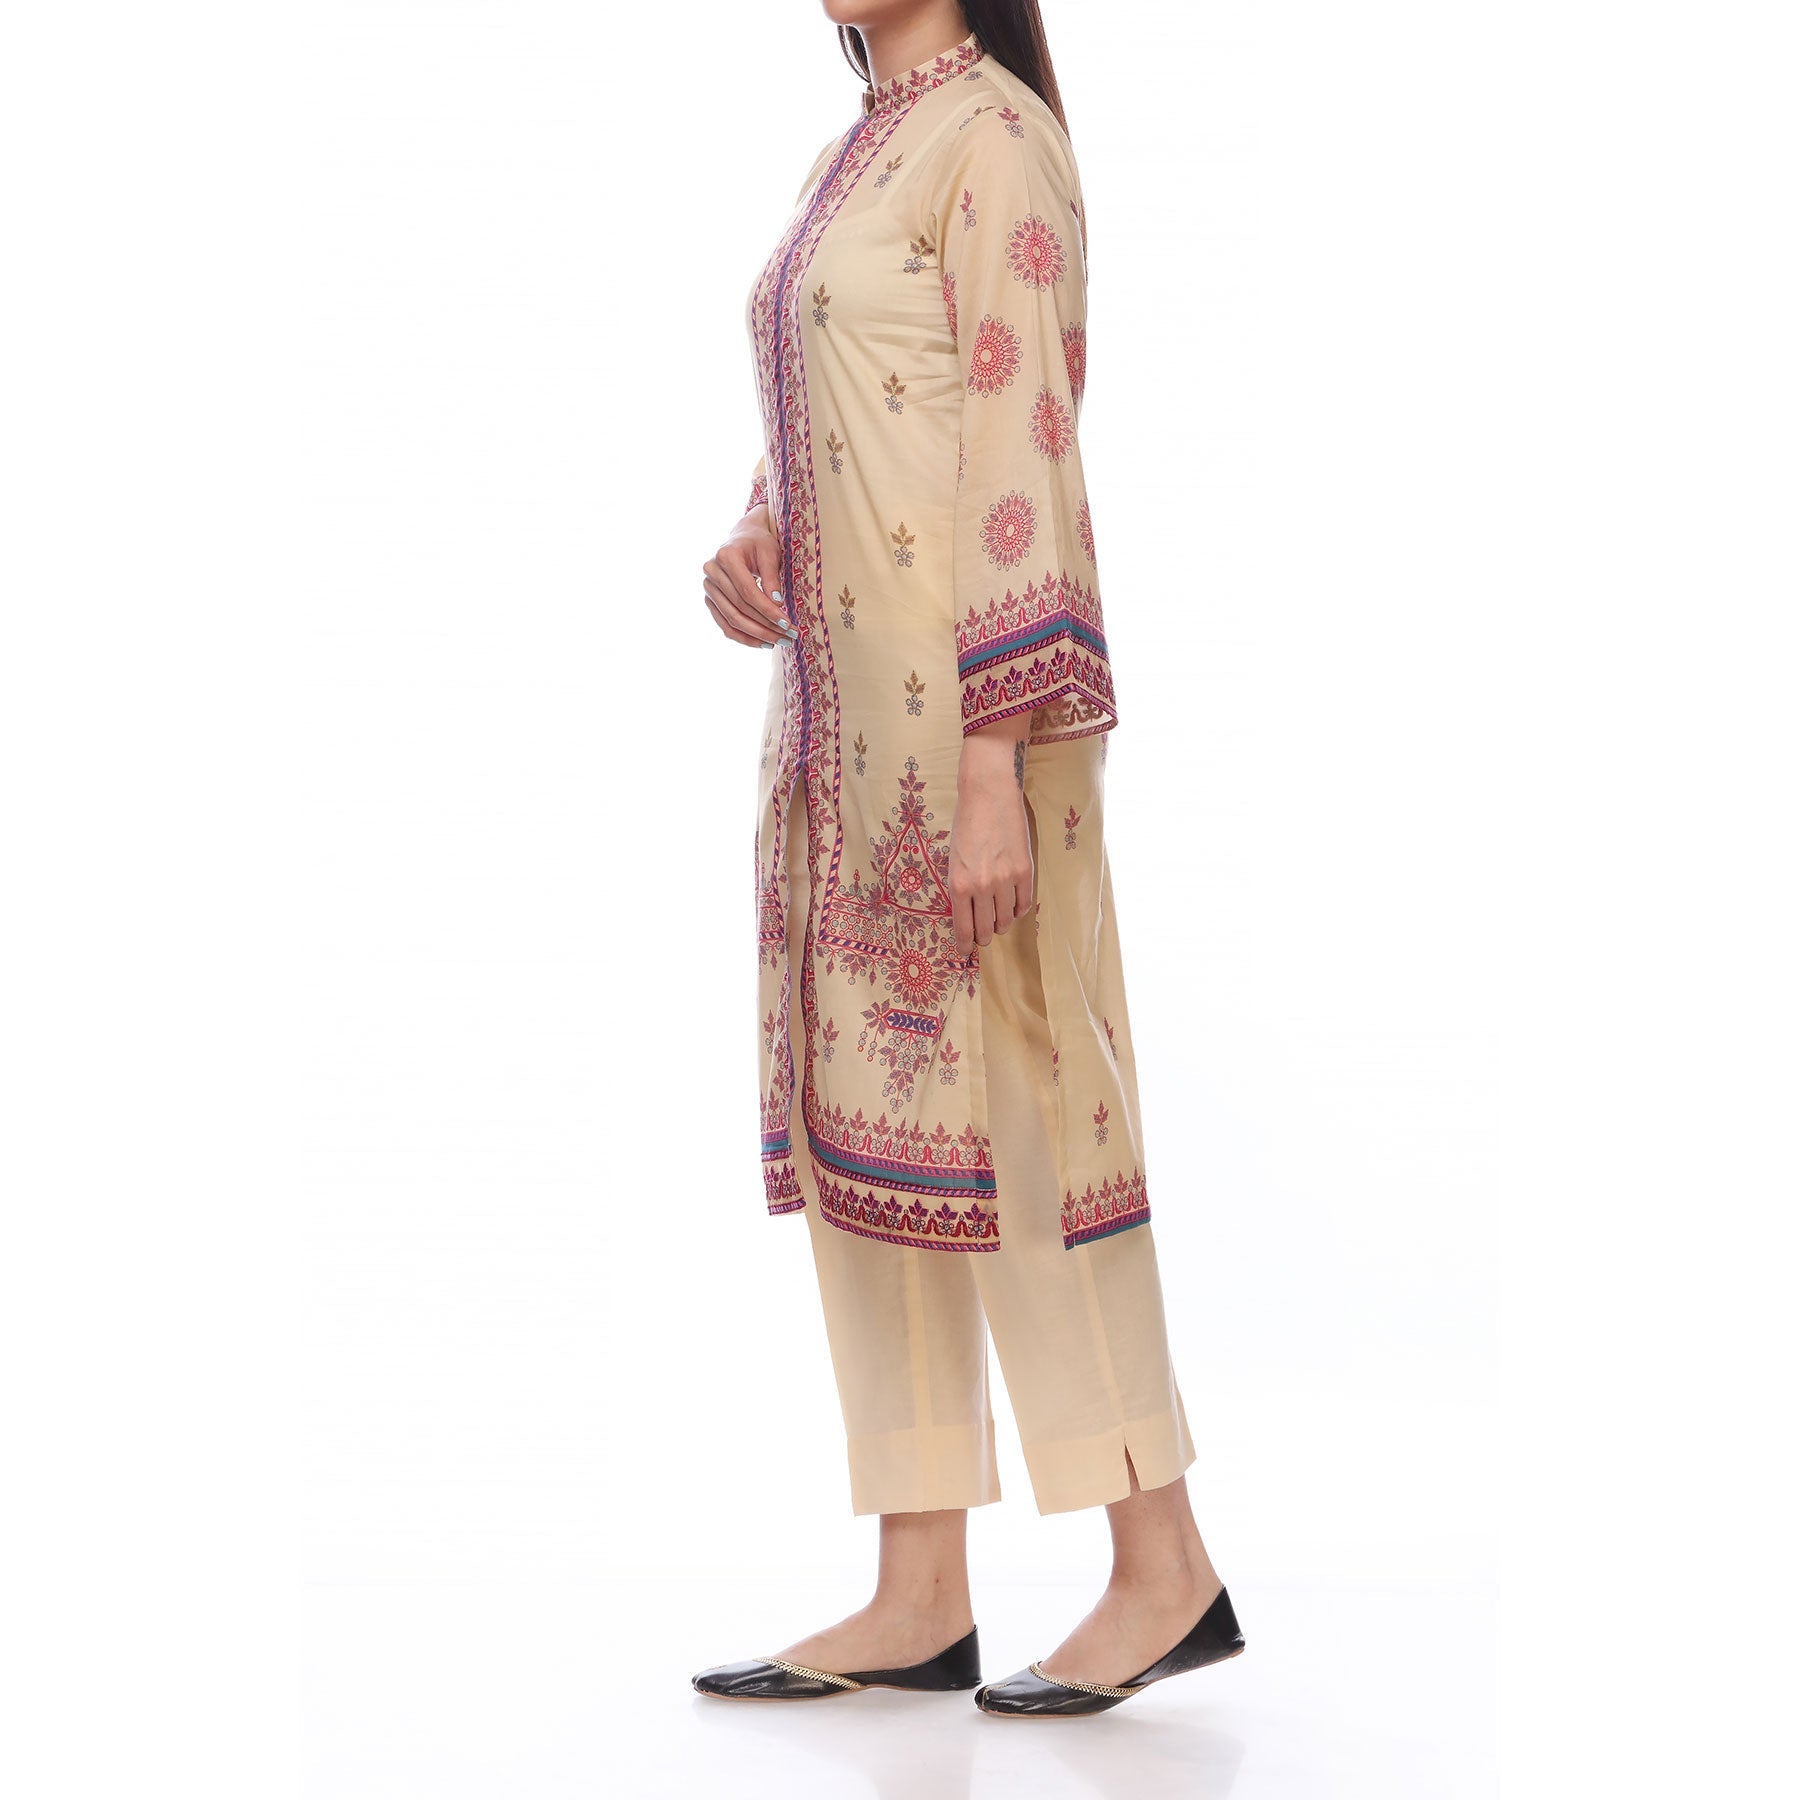 Digital Printed Lawn Shirt With Embroidered Lace for Cuff and Bottom